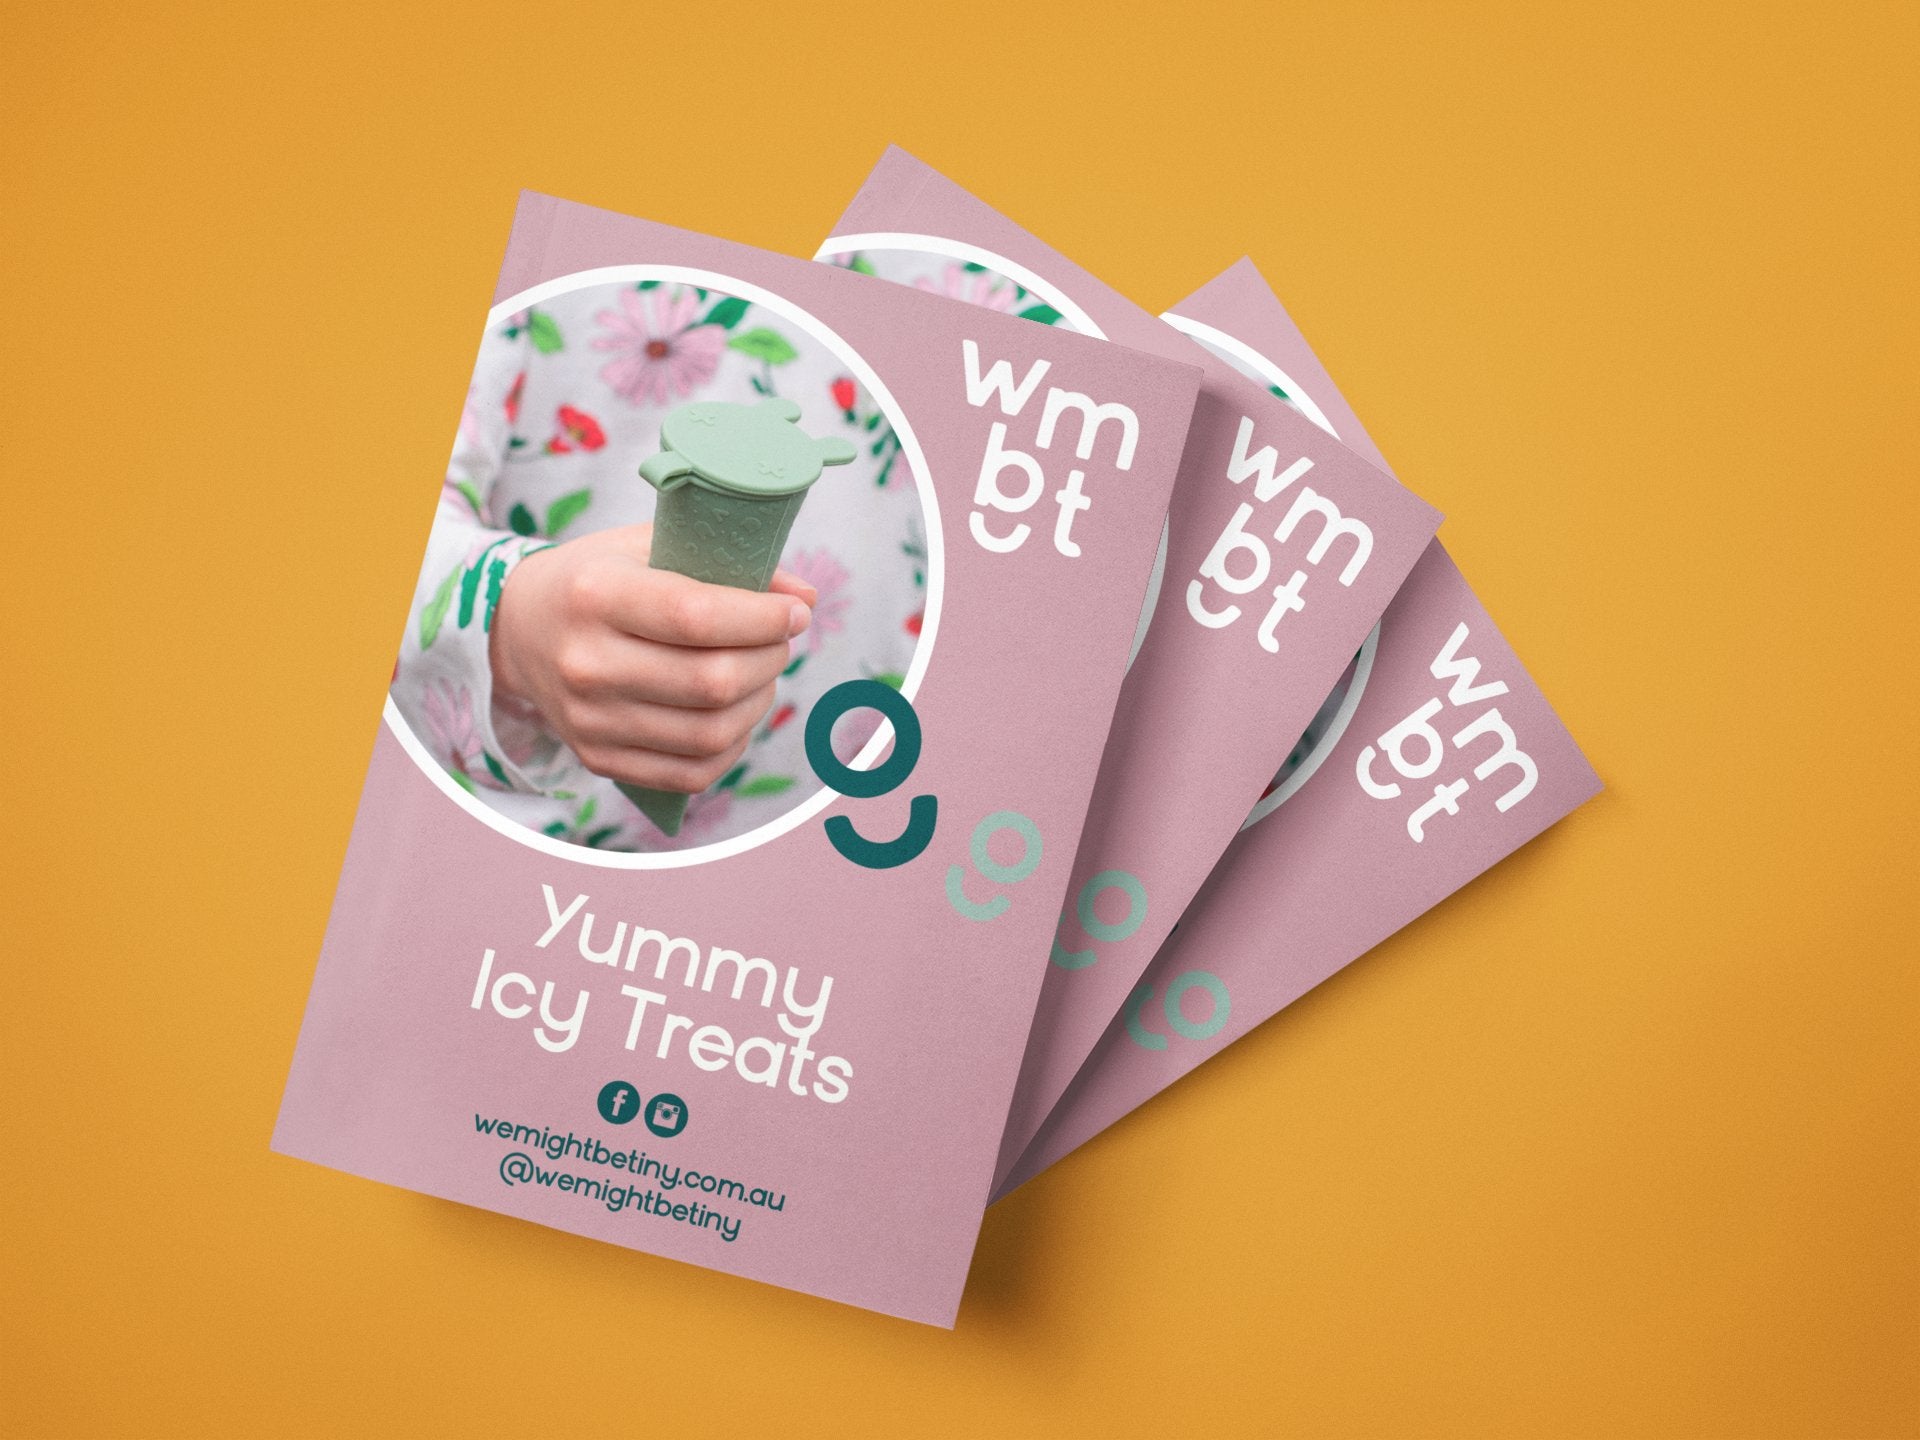 Yummy Icy Treats – A5 booklet